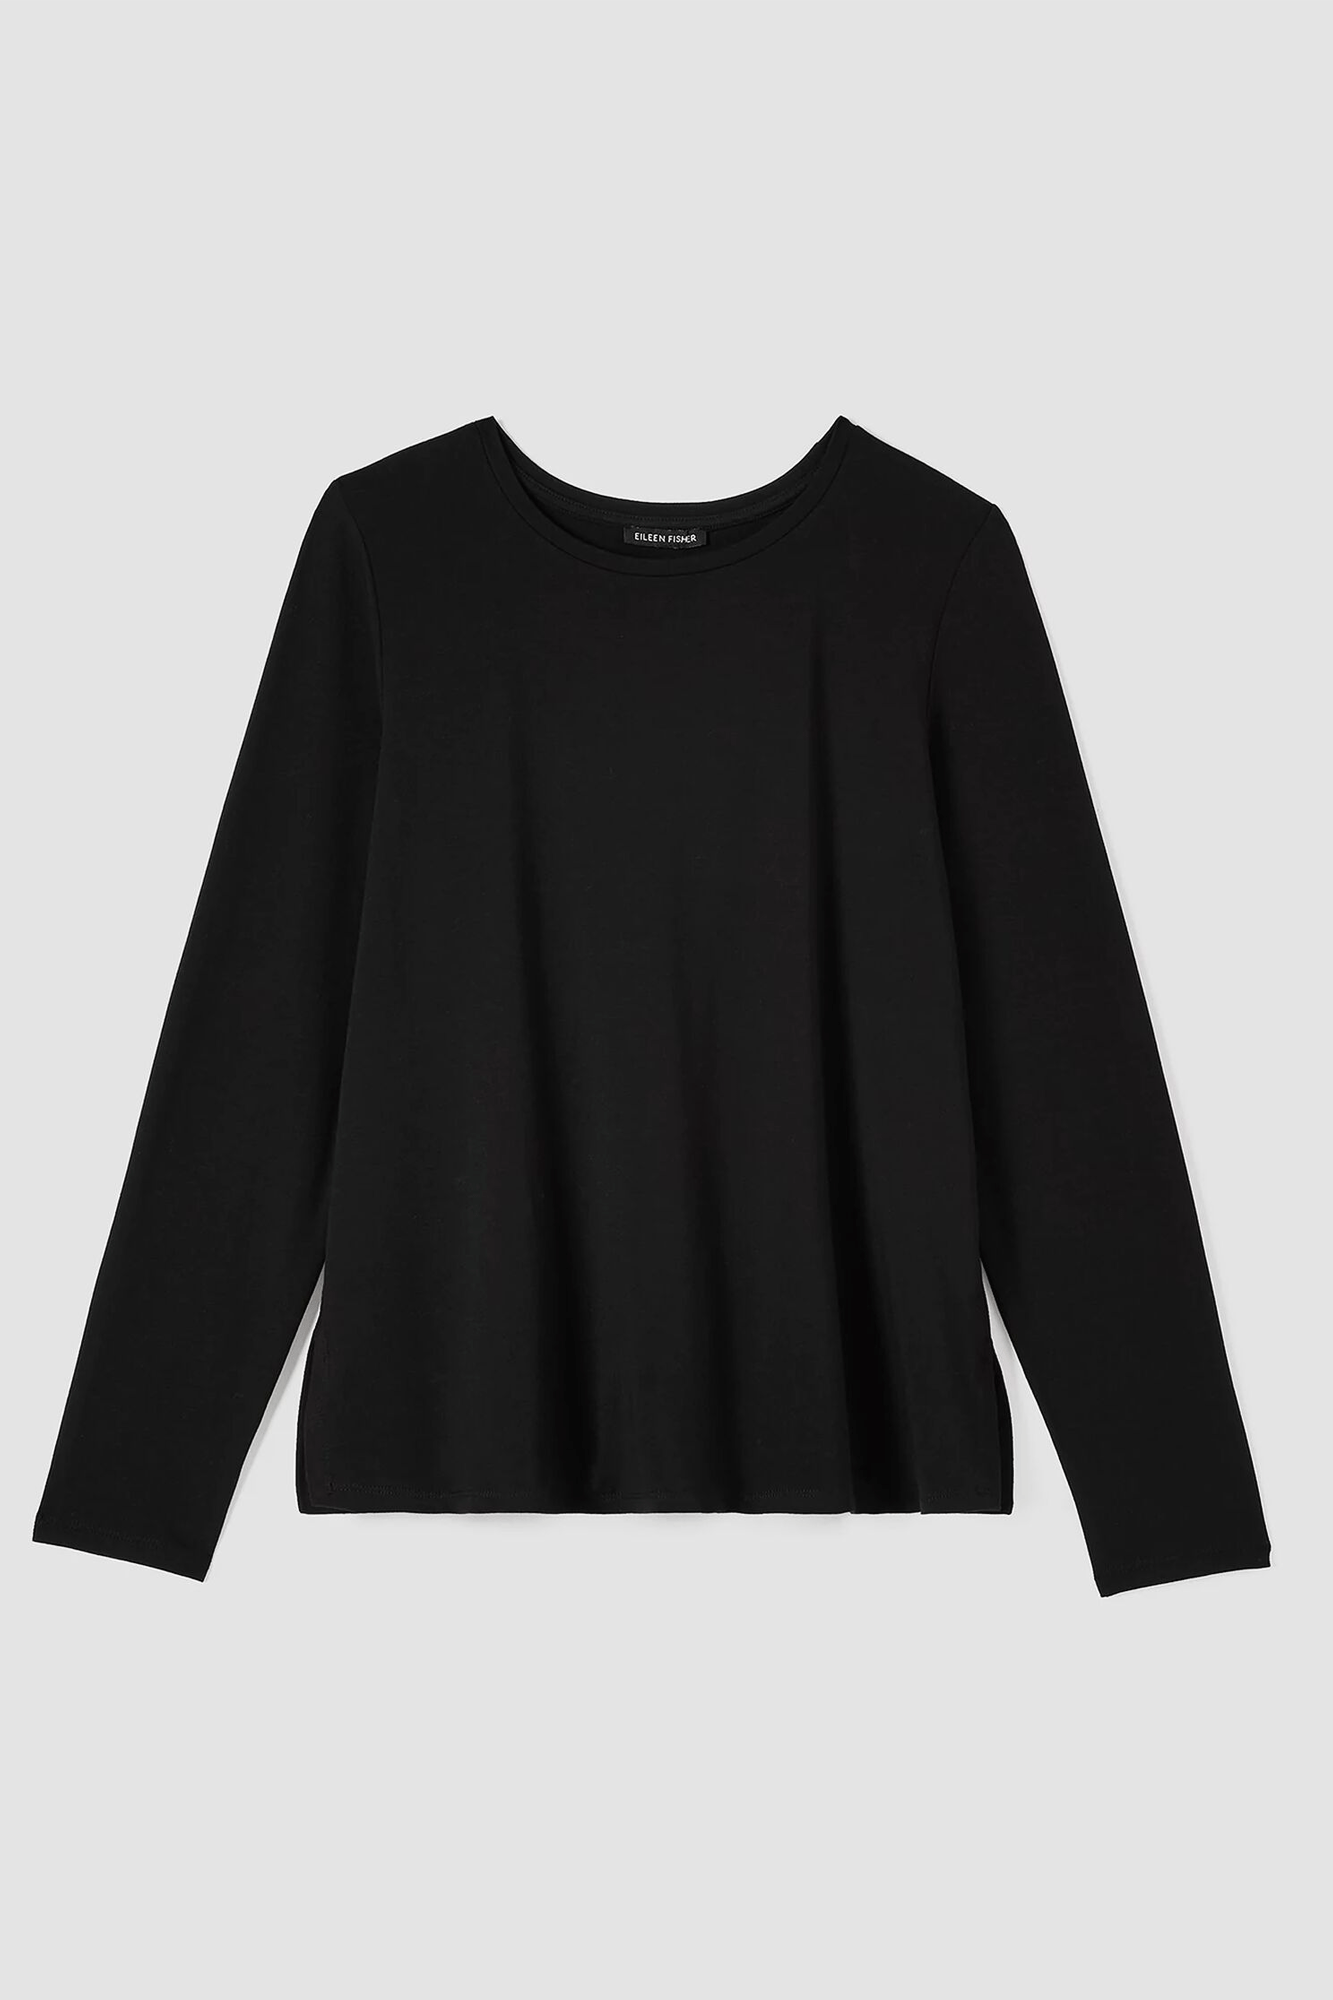 Easy and elevated. A simple top with a crew neck from Eileen Fisher features 4-inch side slits.